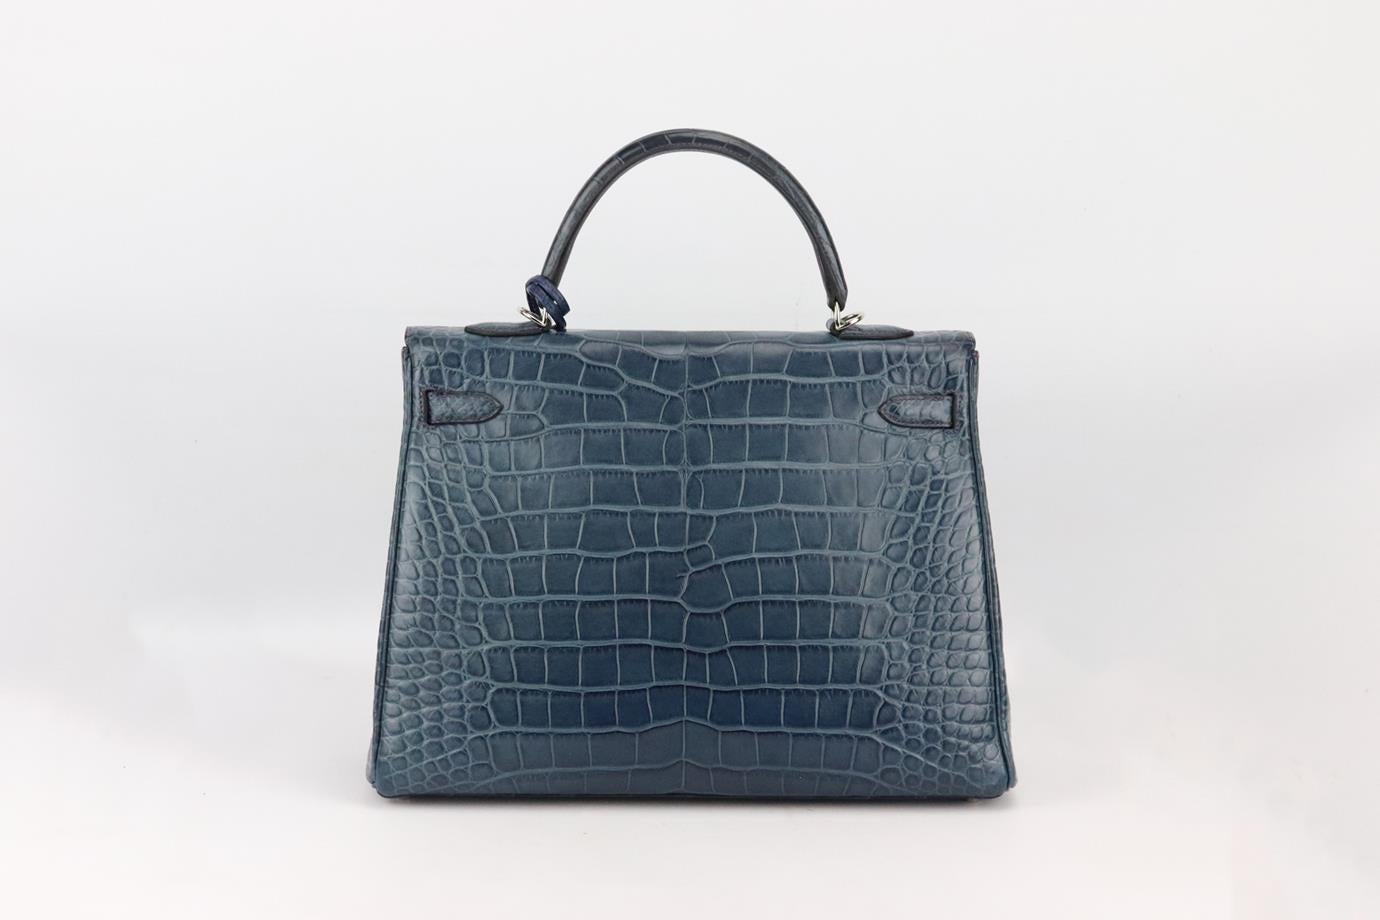 Hermès 2013 Kelly 35cm Bi-colour Matte Alligator Mississippiensis Leather Bag In Excellent Condition For Sale In London, GB